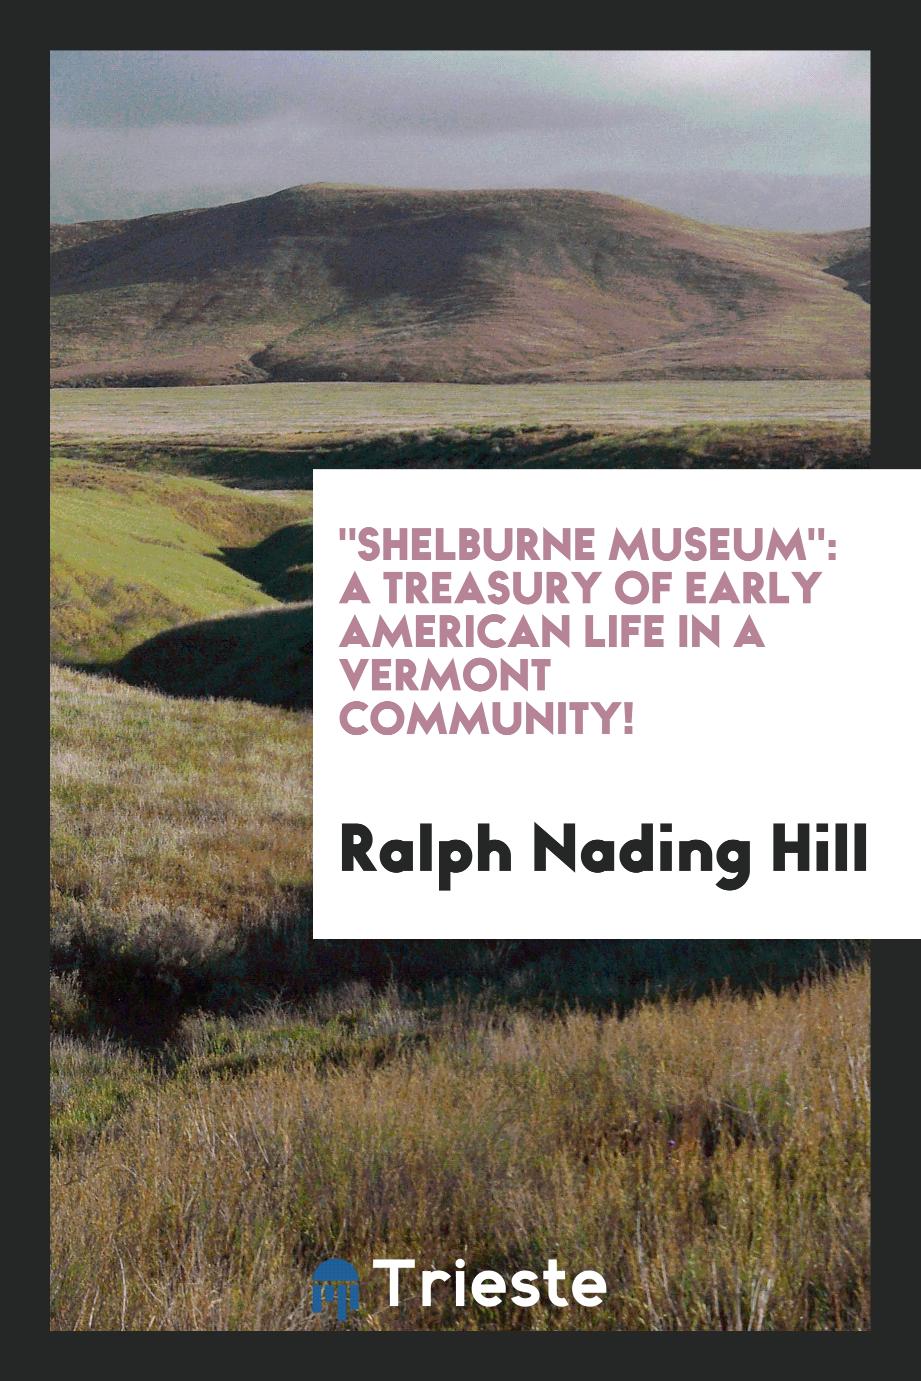 "Shelburne Museum": A Treasury of Early American Life in a Vermont Community!